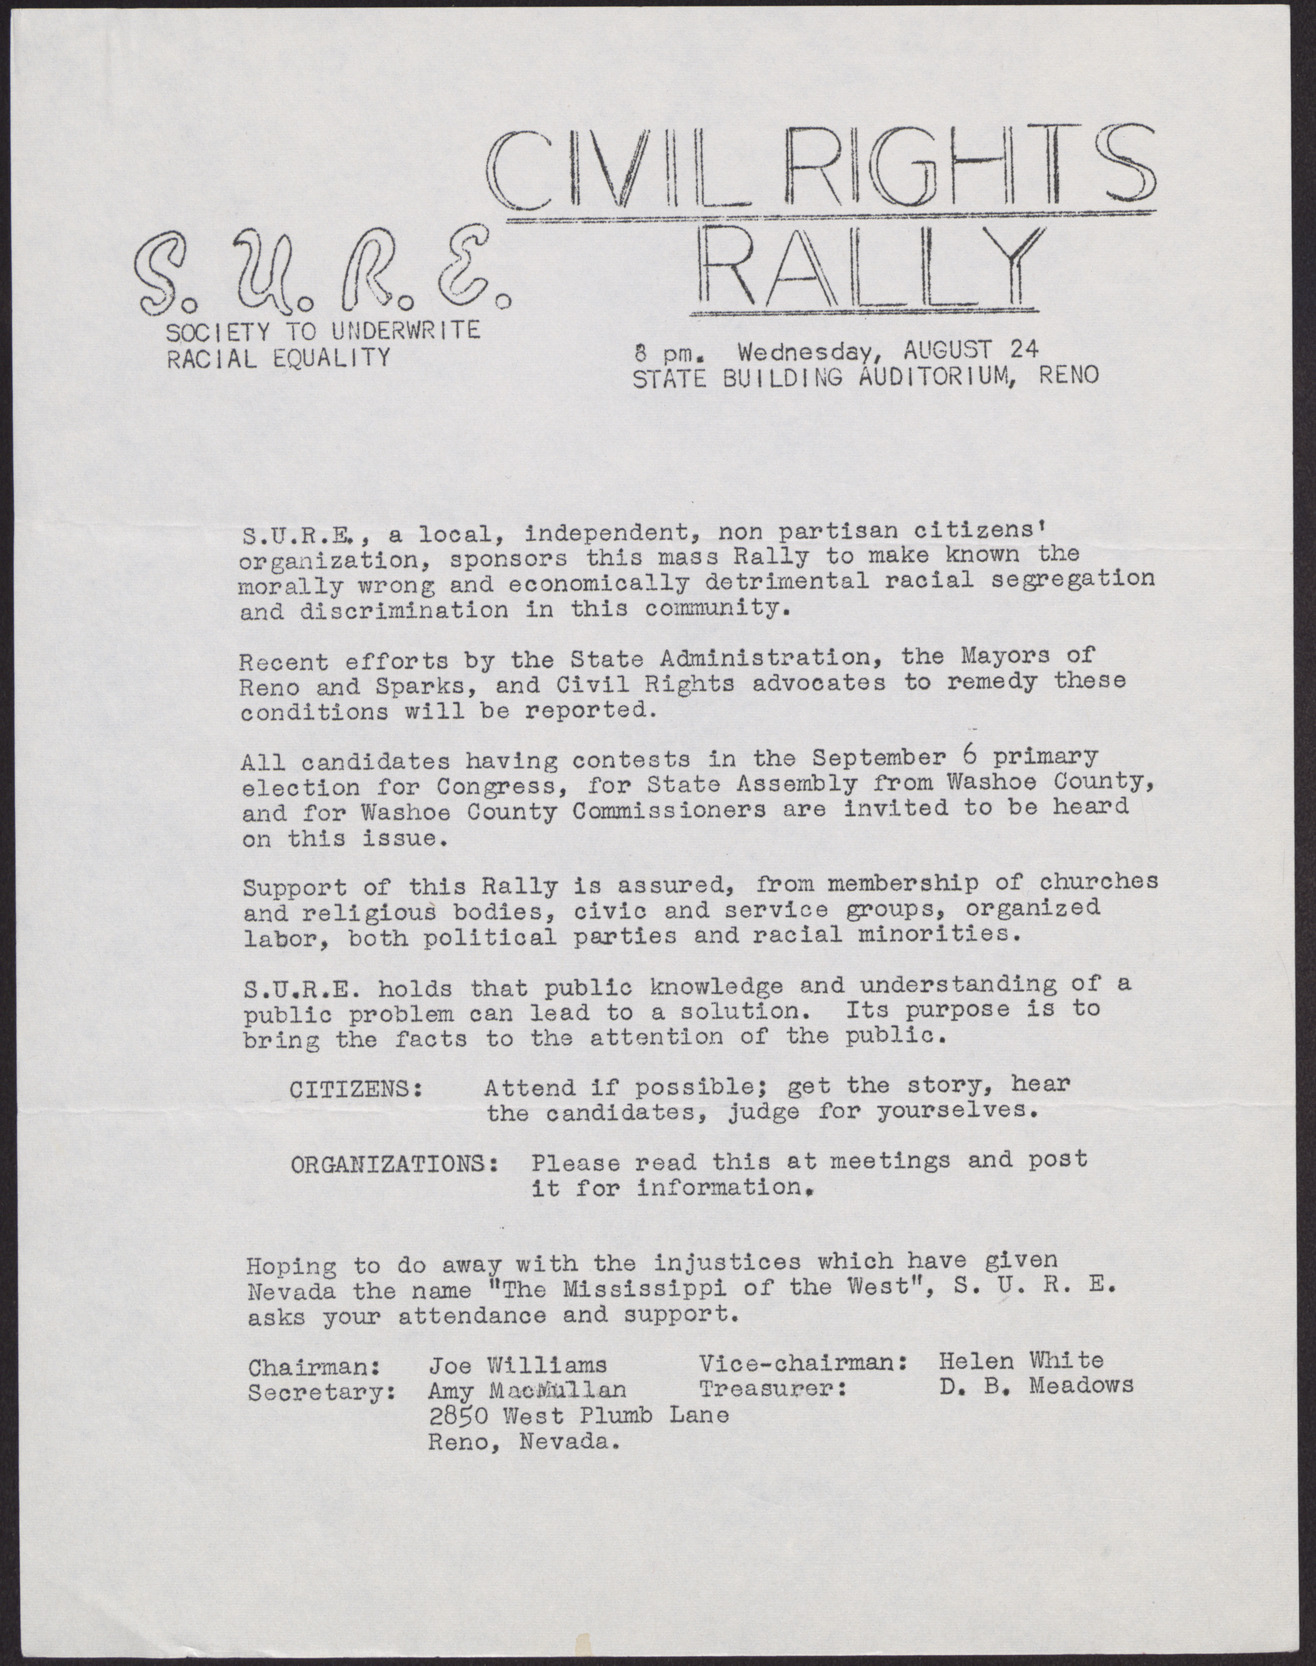 Invitation/Announcement for a civil rights rally sponsored by S.U.R.E., August 24, [no year]